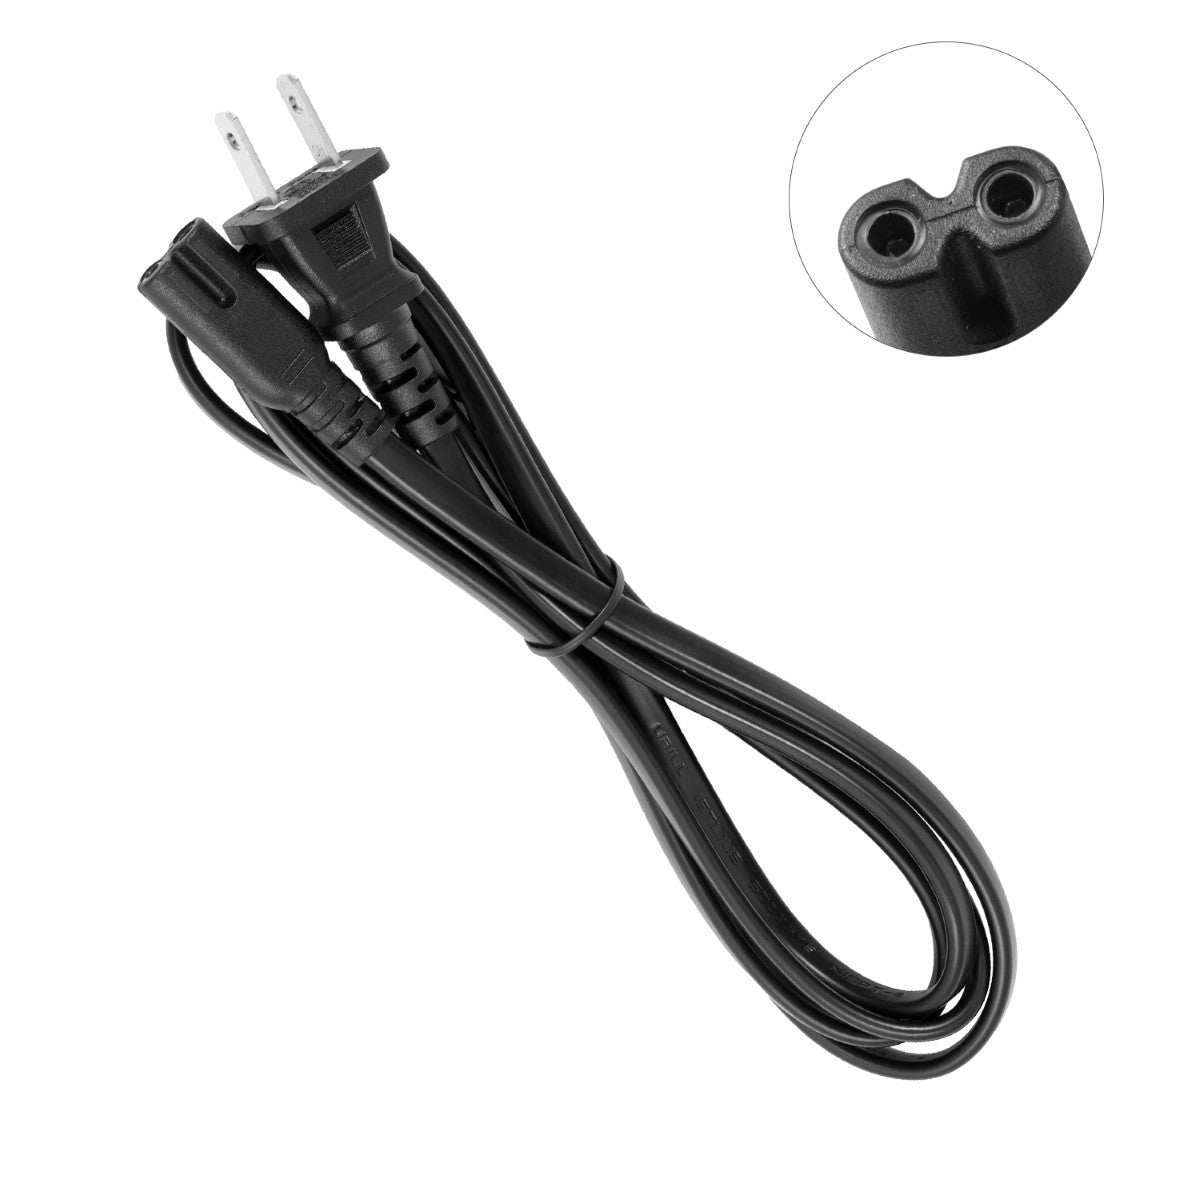 Power Cord for Epson Expression XP-800 Printer.